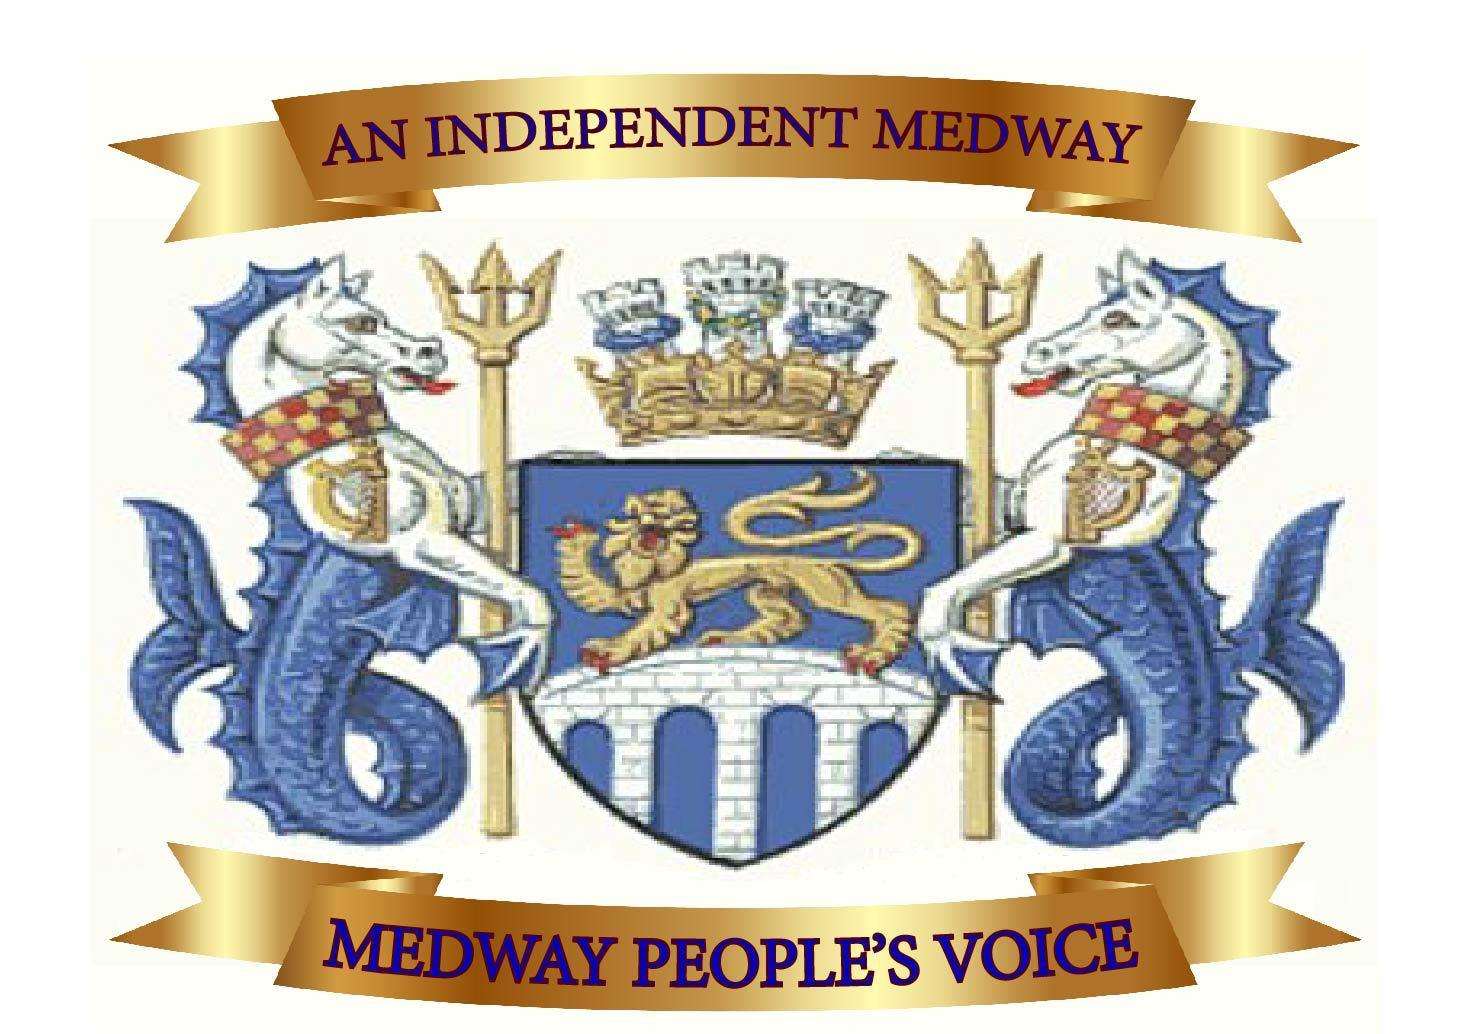 Medway People's Voice logo (6366452)